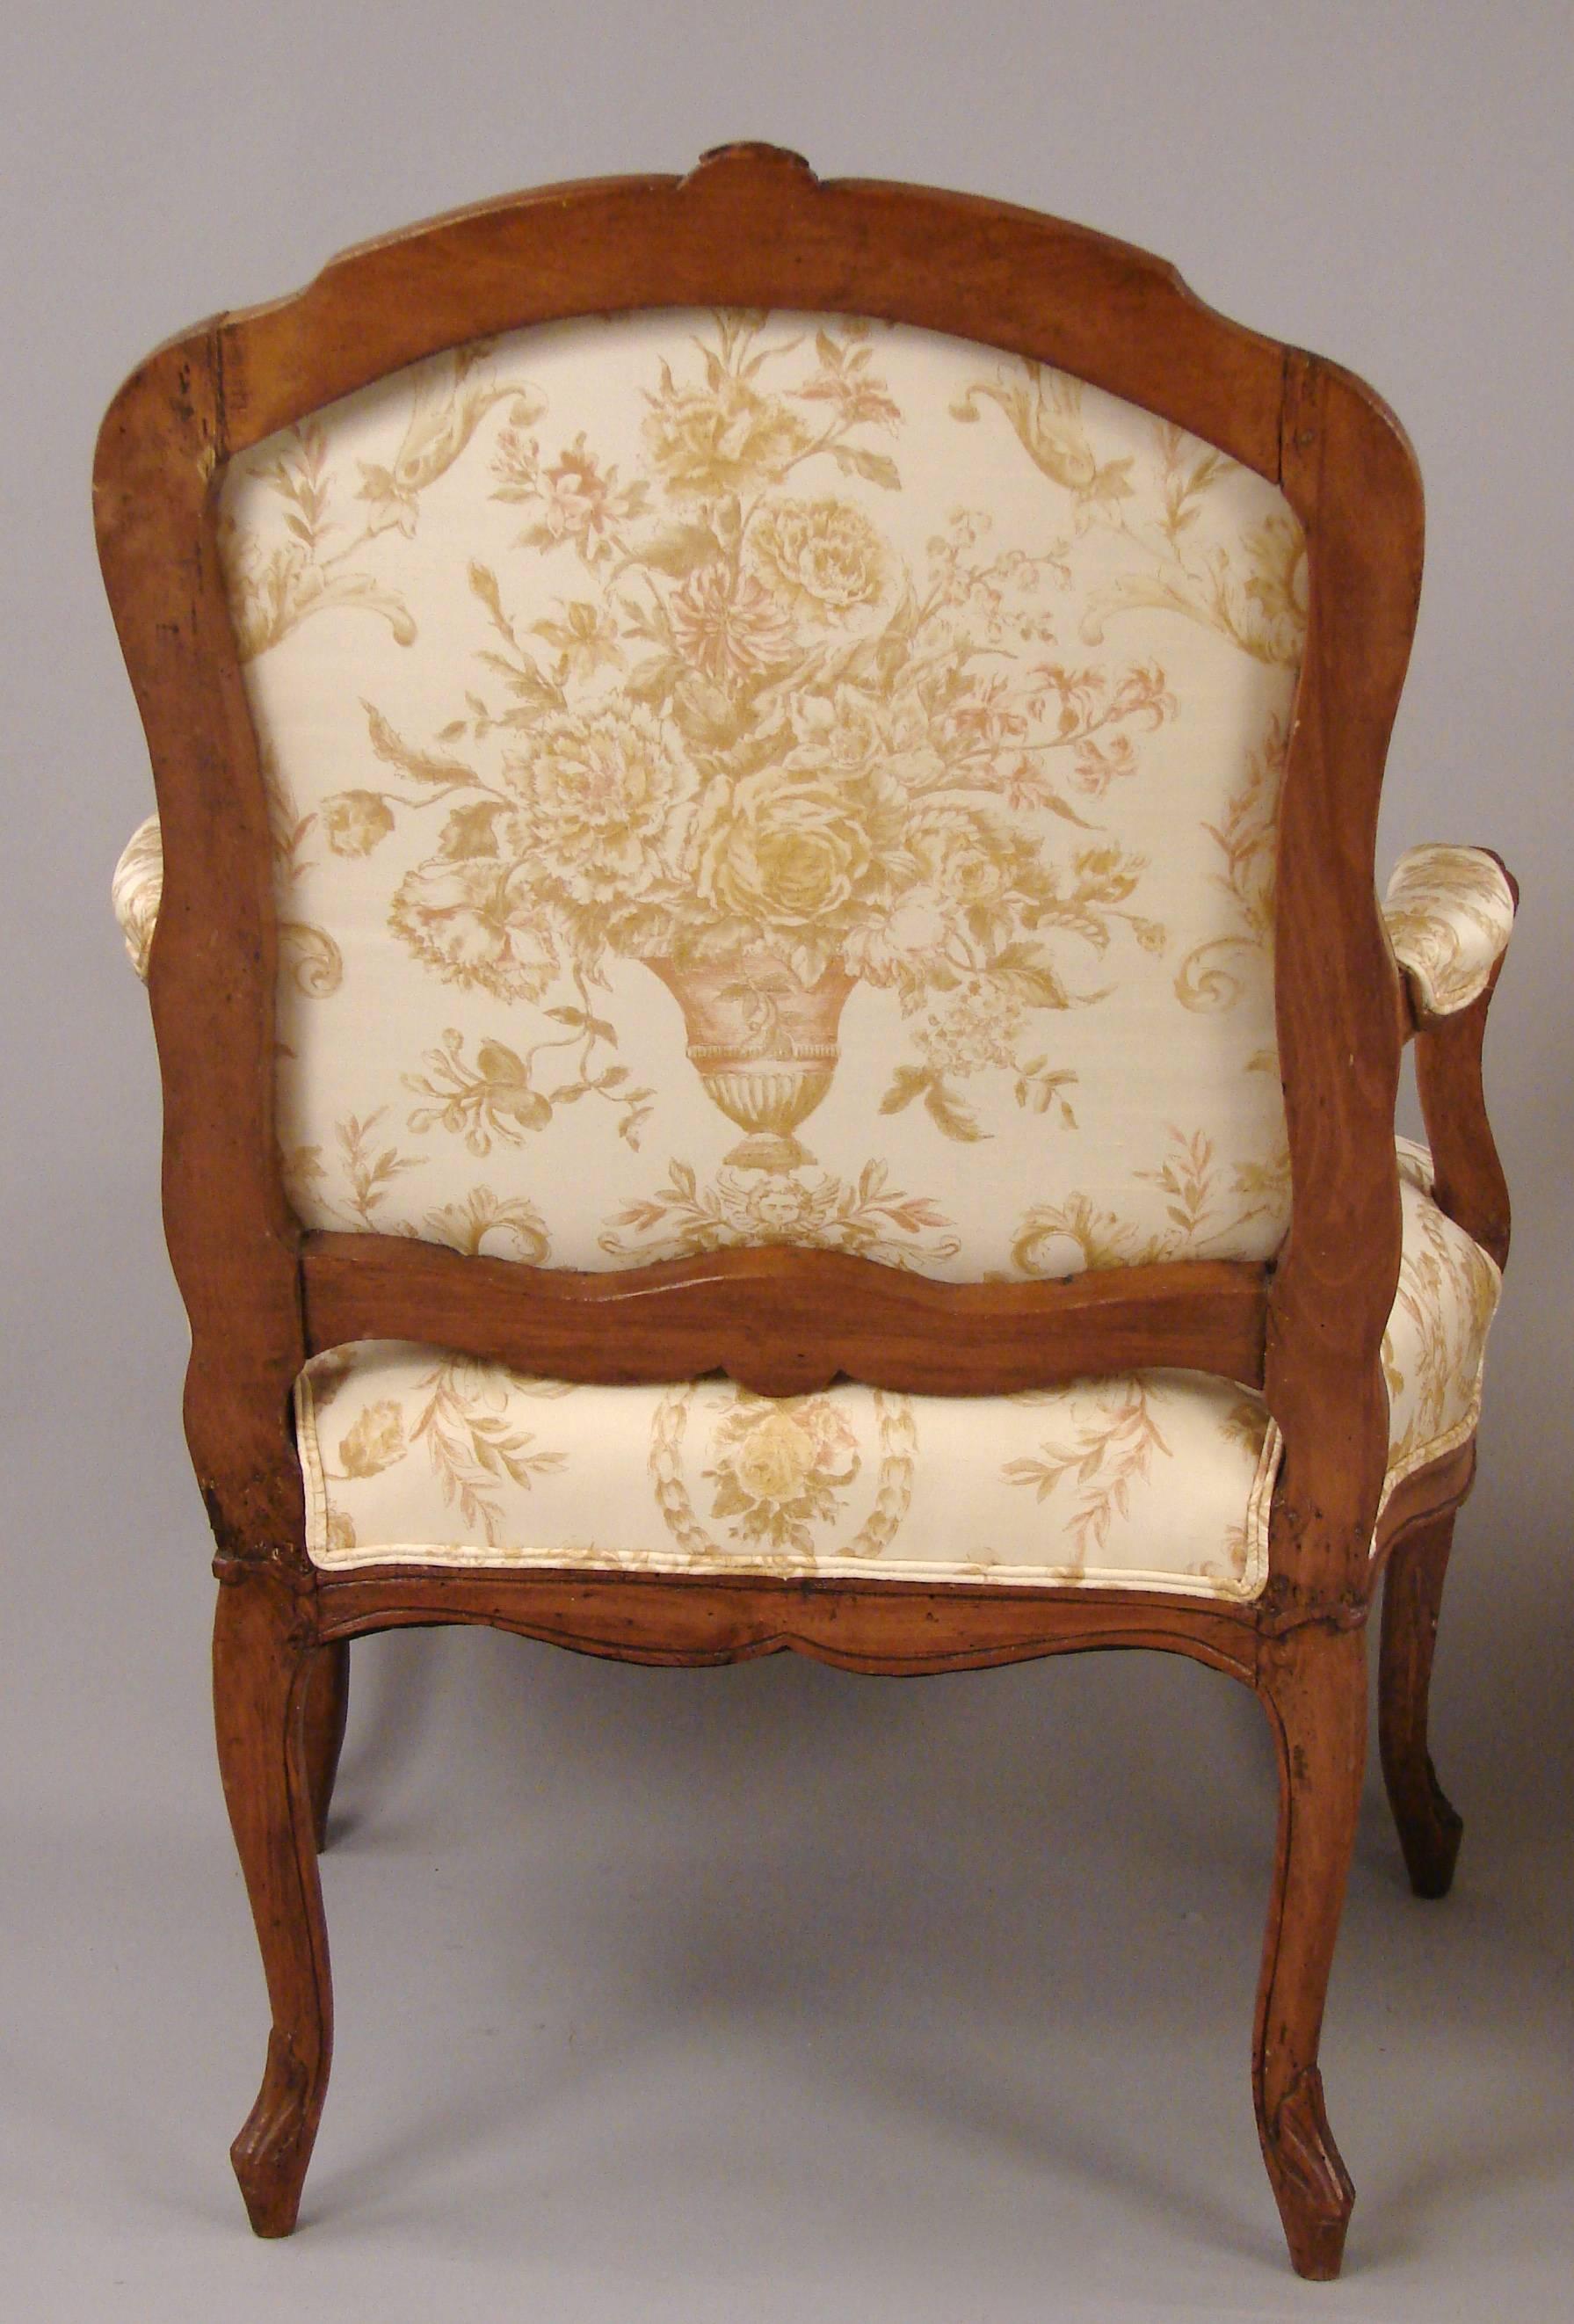 A pretty pair of French Louis XV style walnut armchairs of typical form now upholstered with cream silk floral print, circa 1860 or earlier.